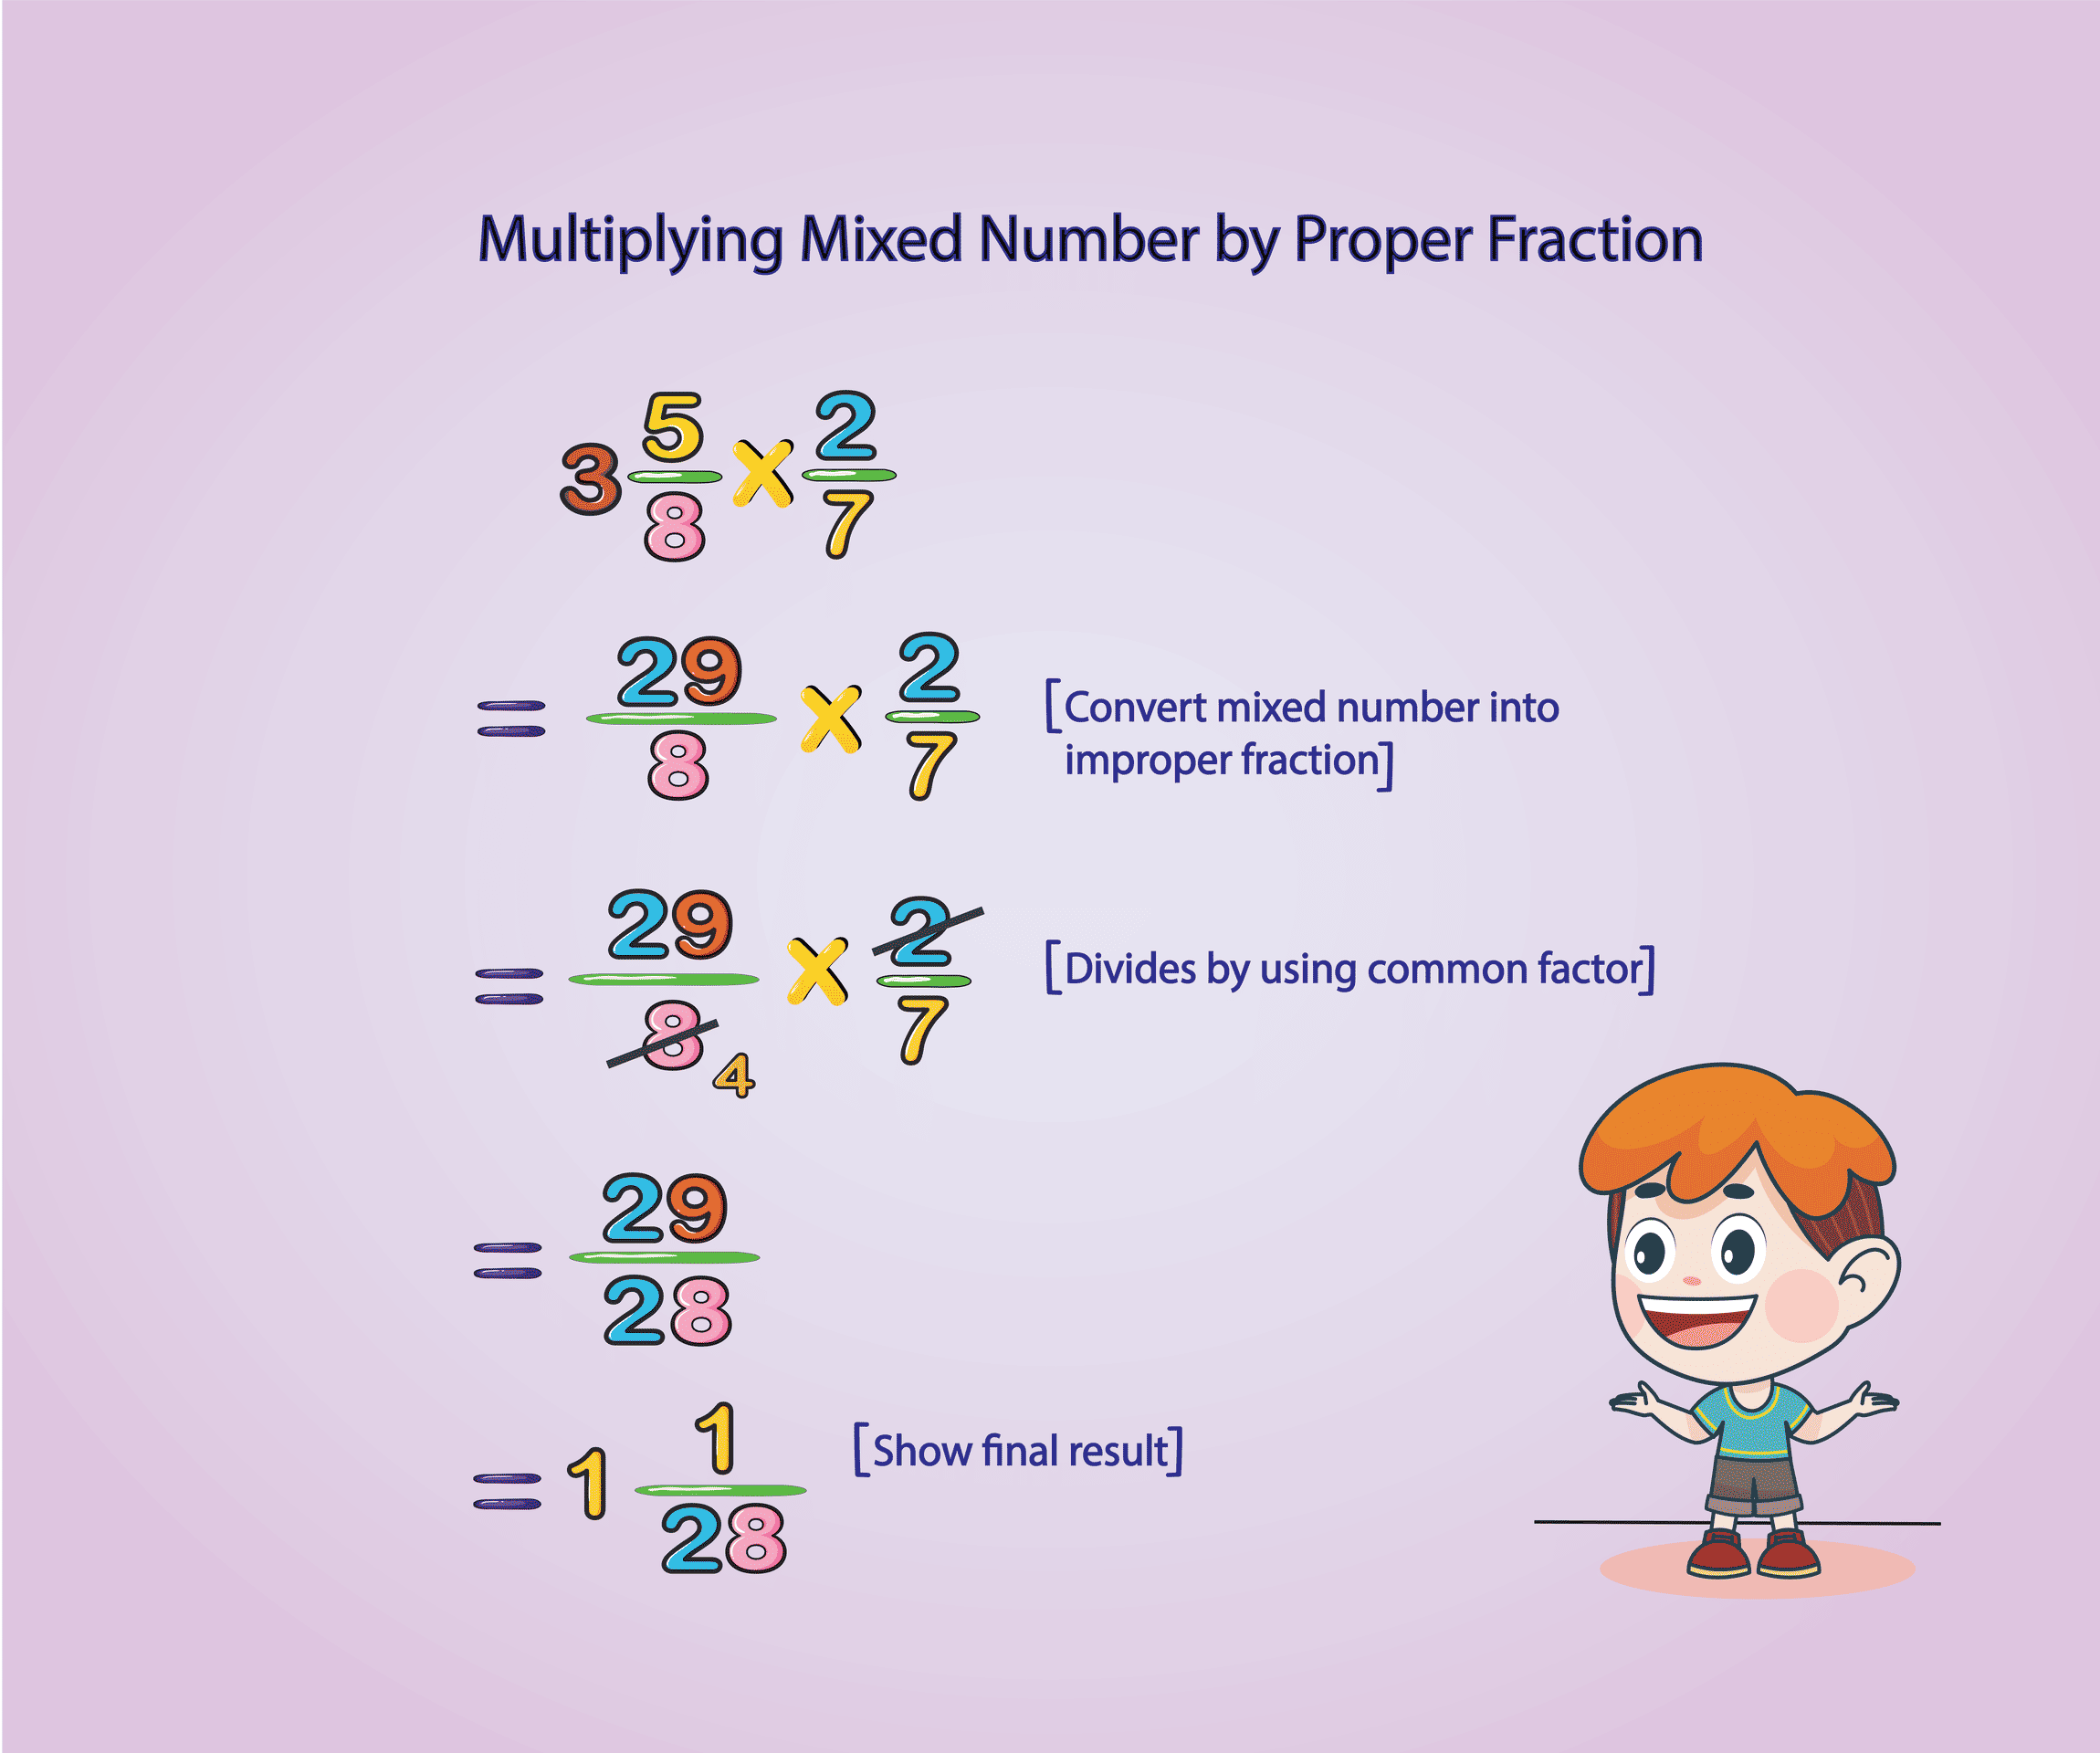 Multiplying Mixed Number by Proper Fraction